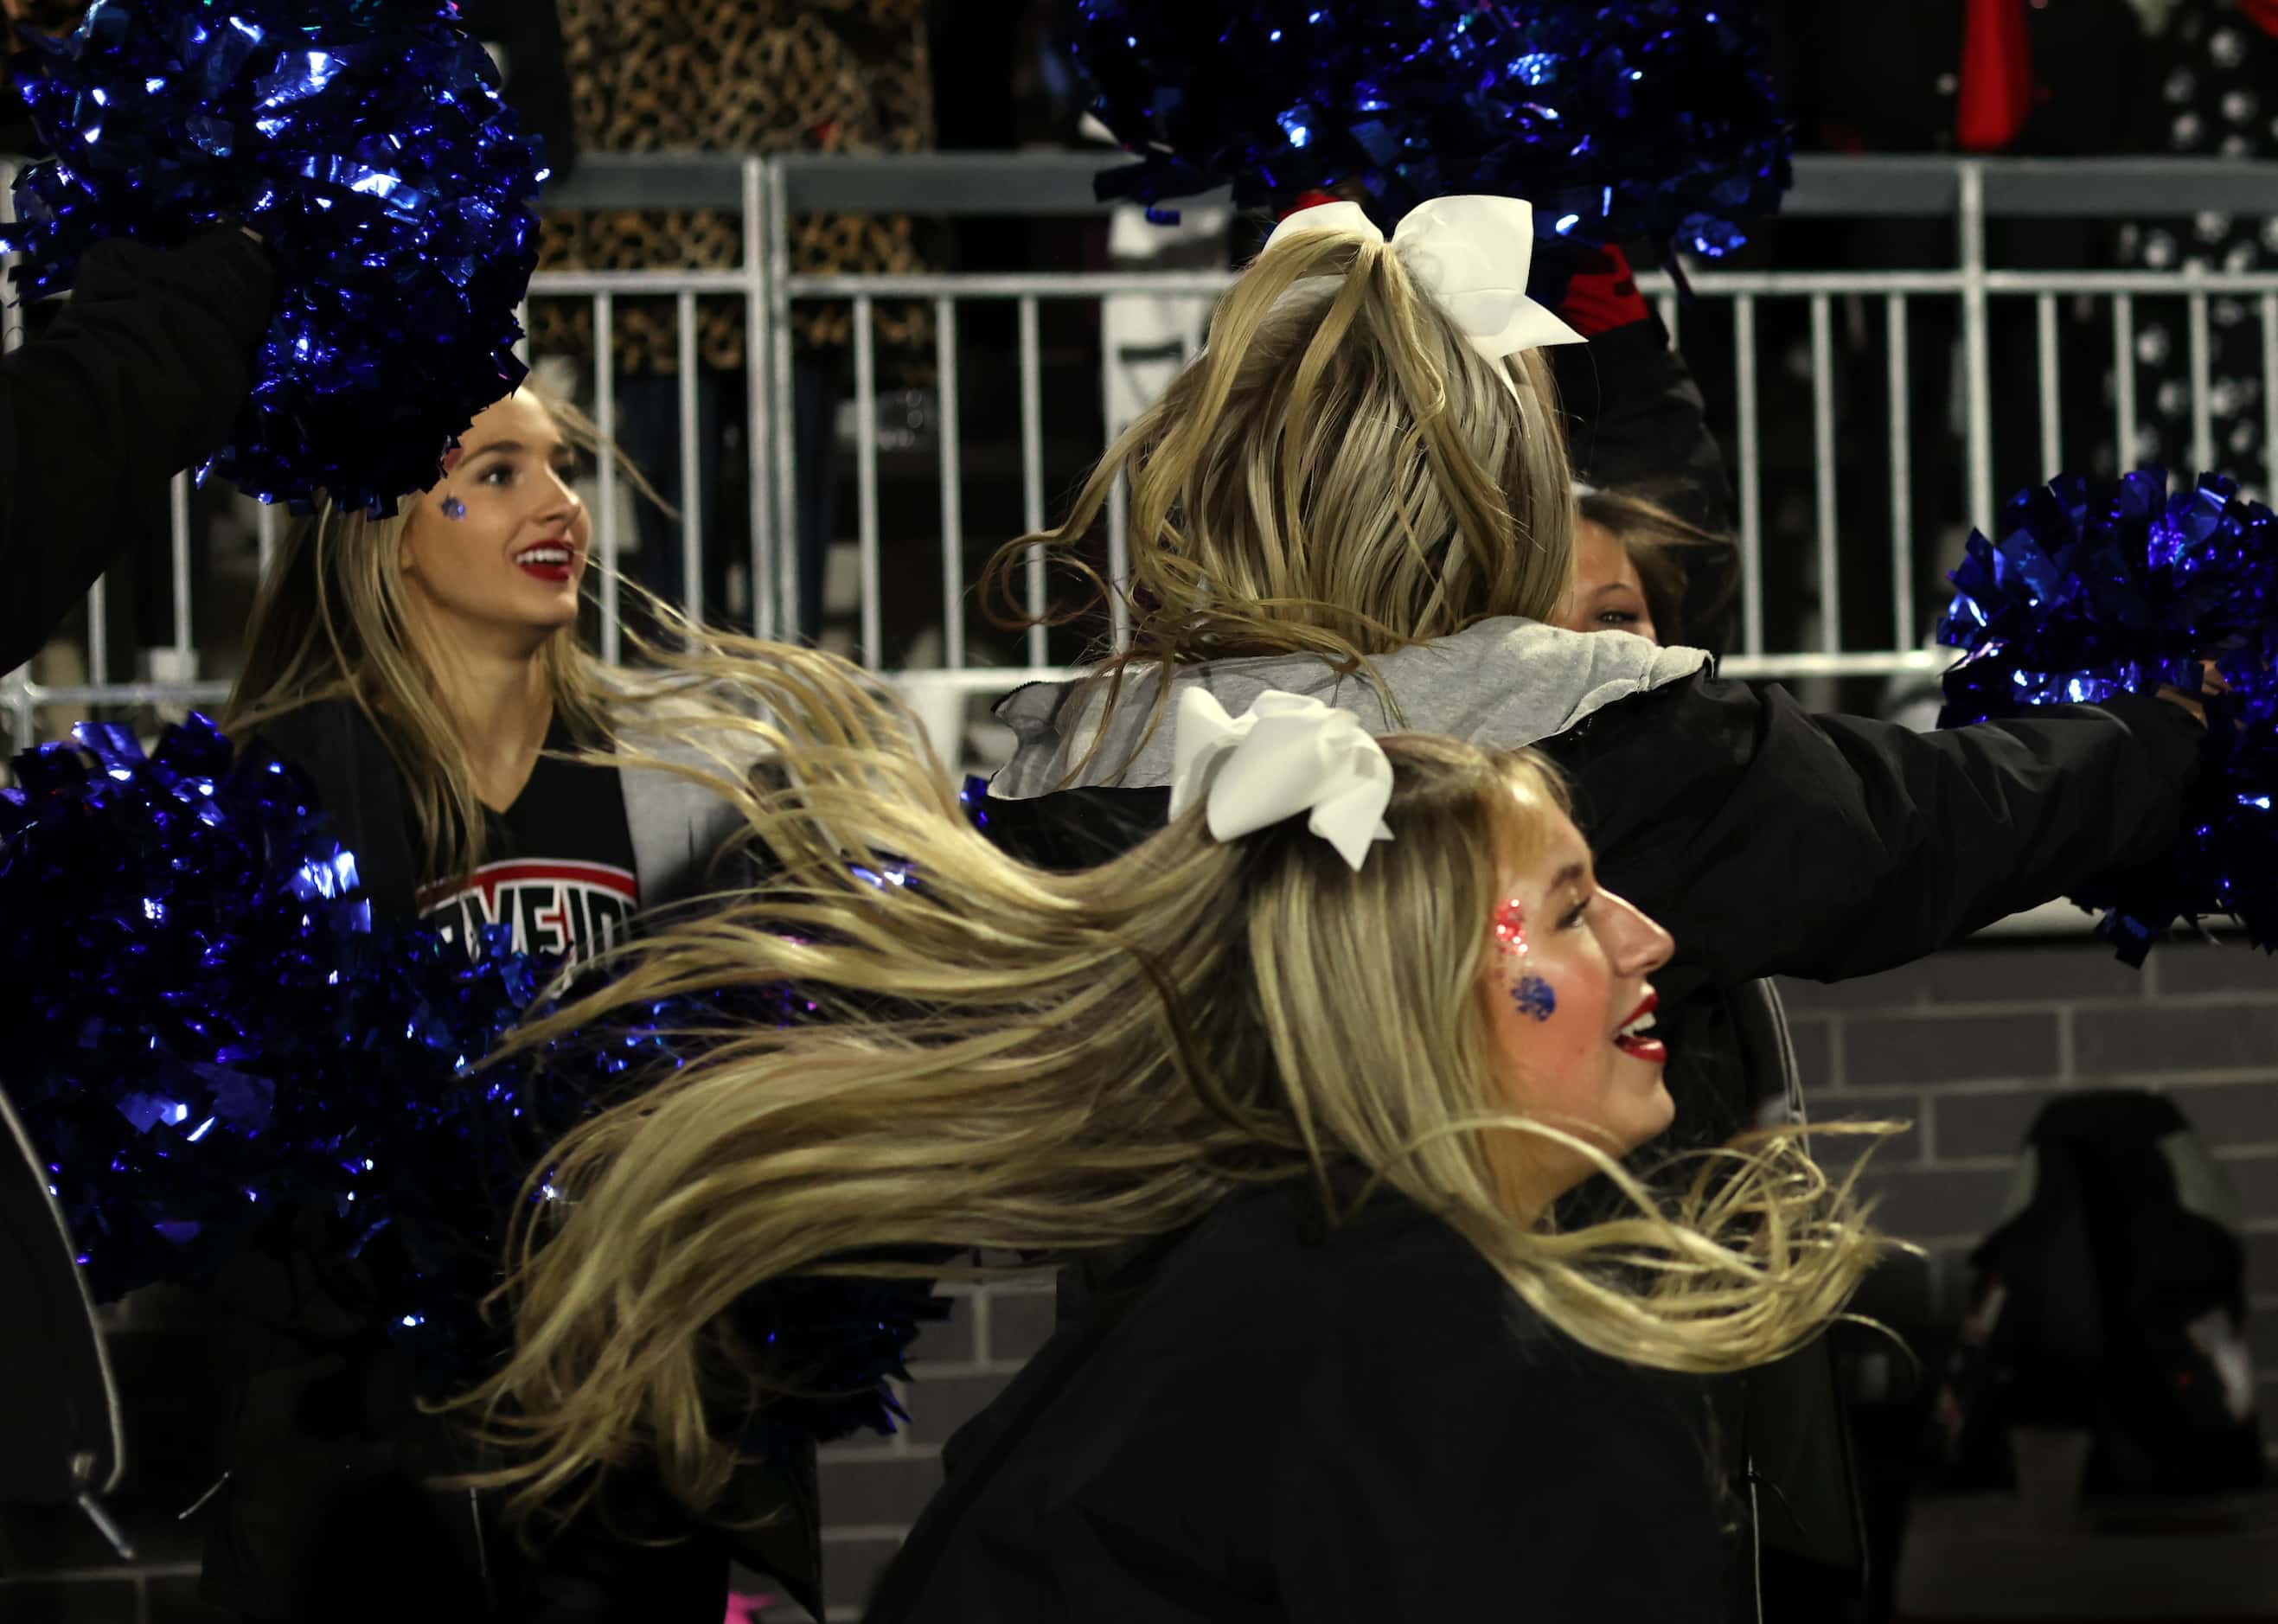 Lucas Lovejoy cheerleaders glance at the scoreboard clock as the final seconds ran down in...